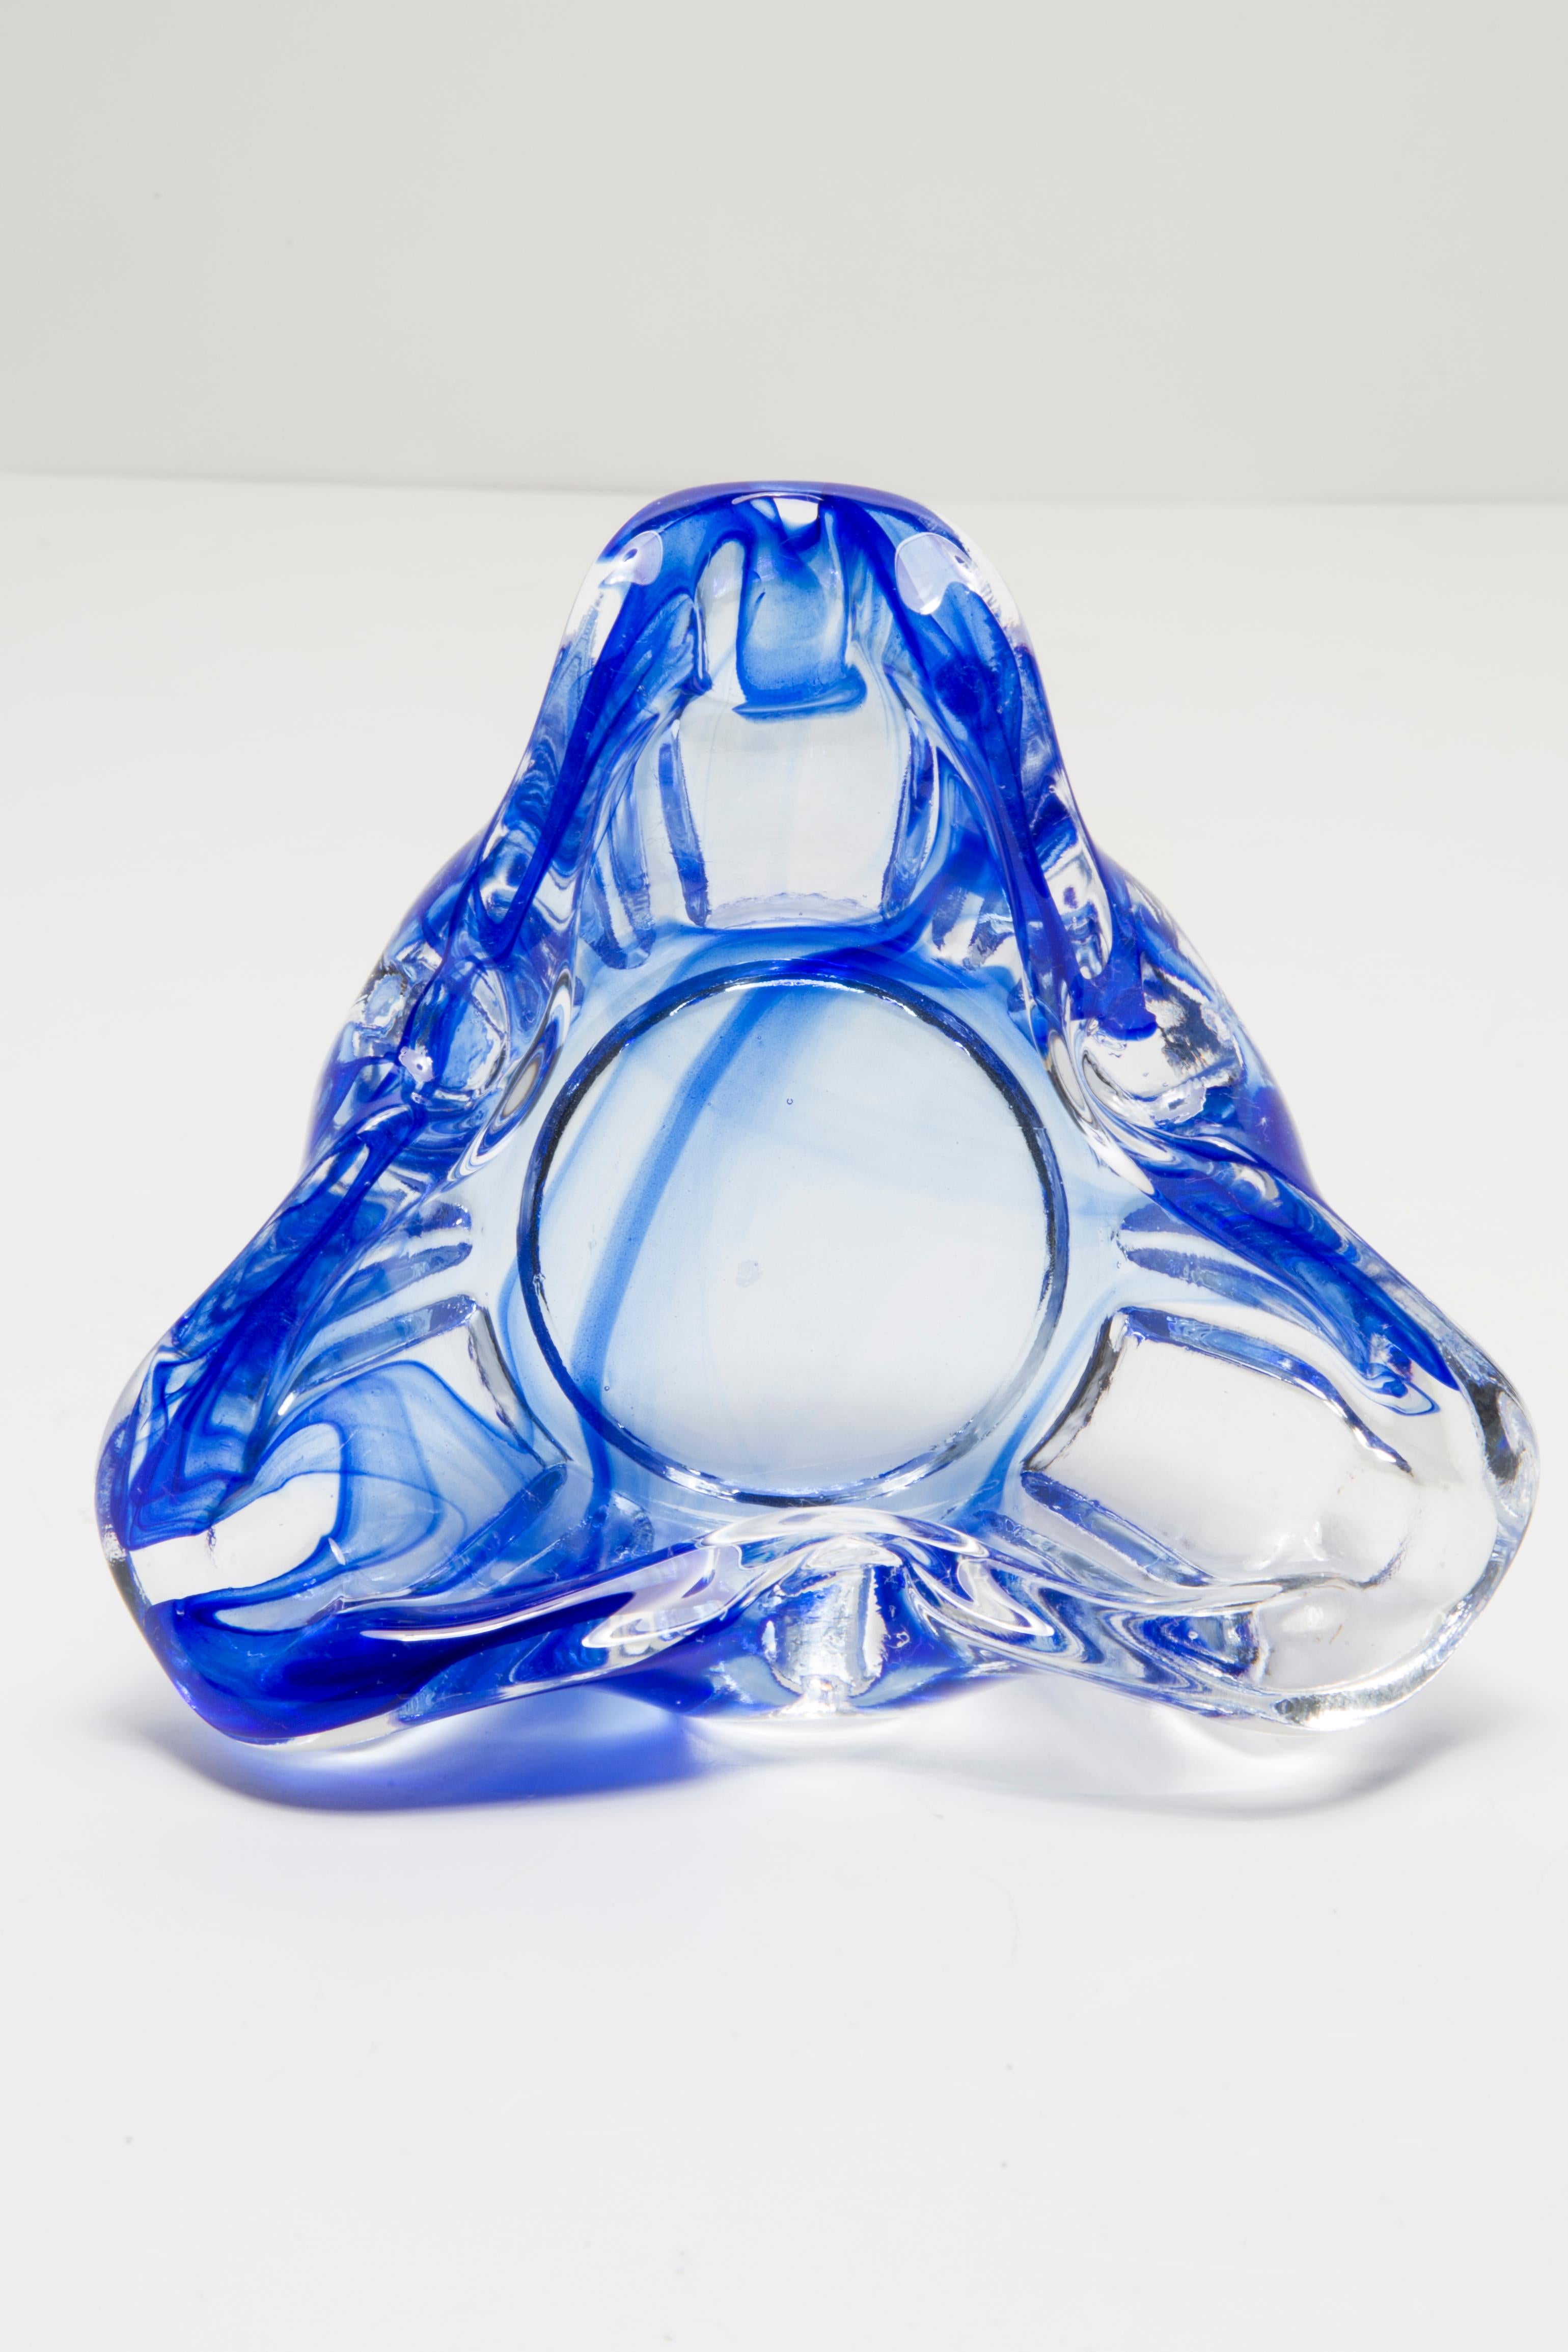 Mid Century Crystal Blue Artistic Glass Ashtray Bowl, Italy, 1970s For Sale 2